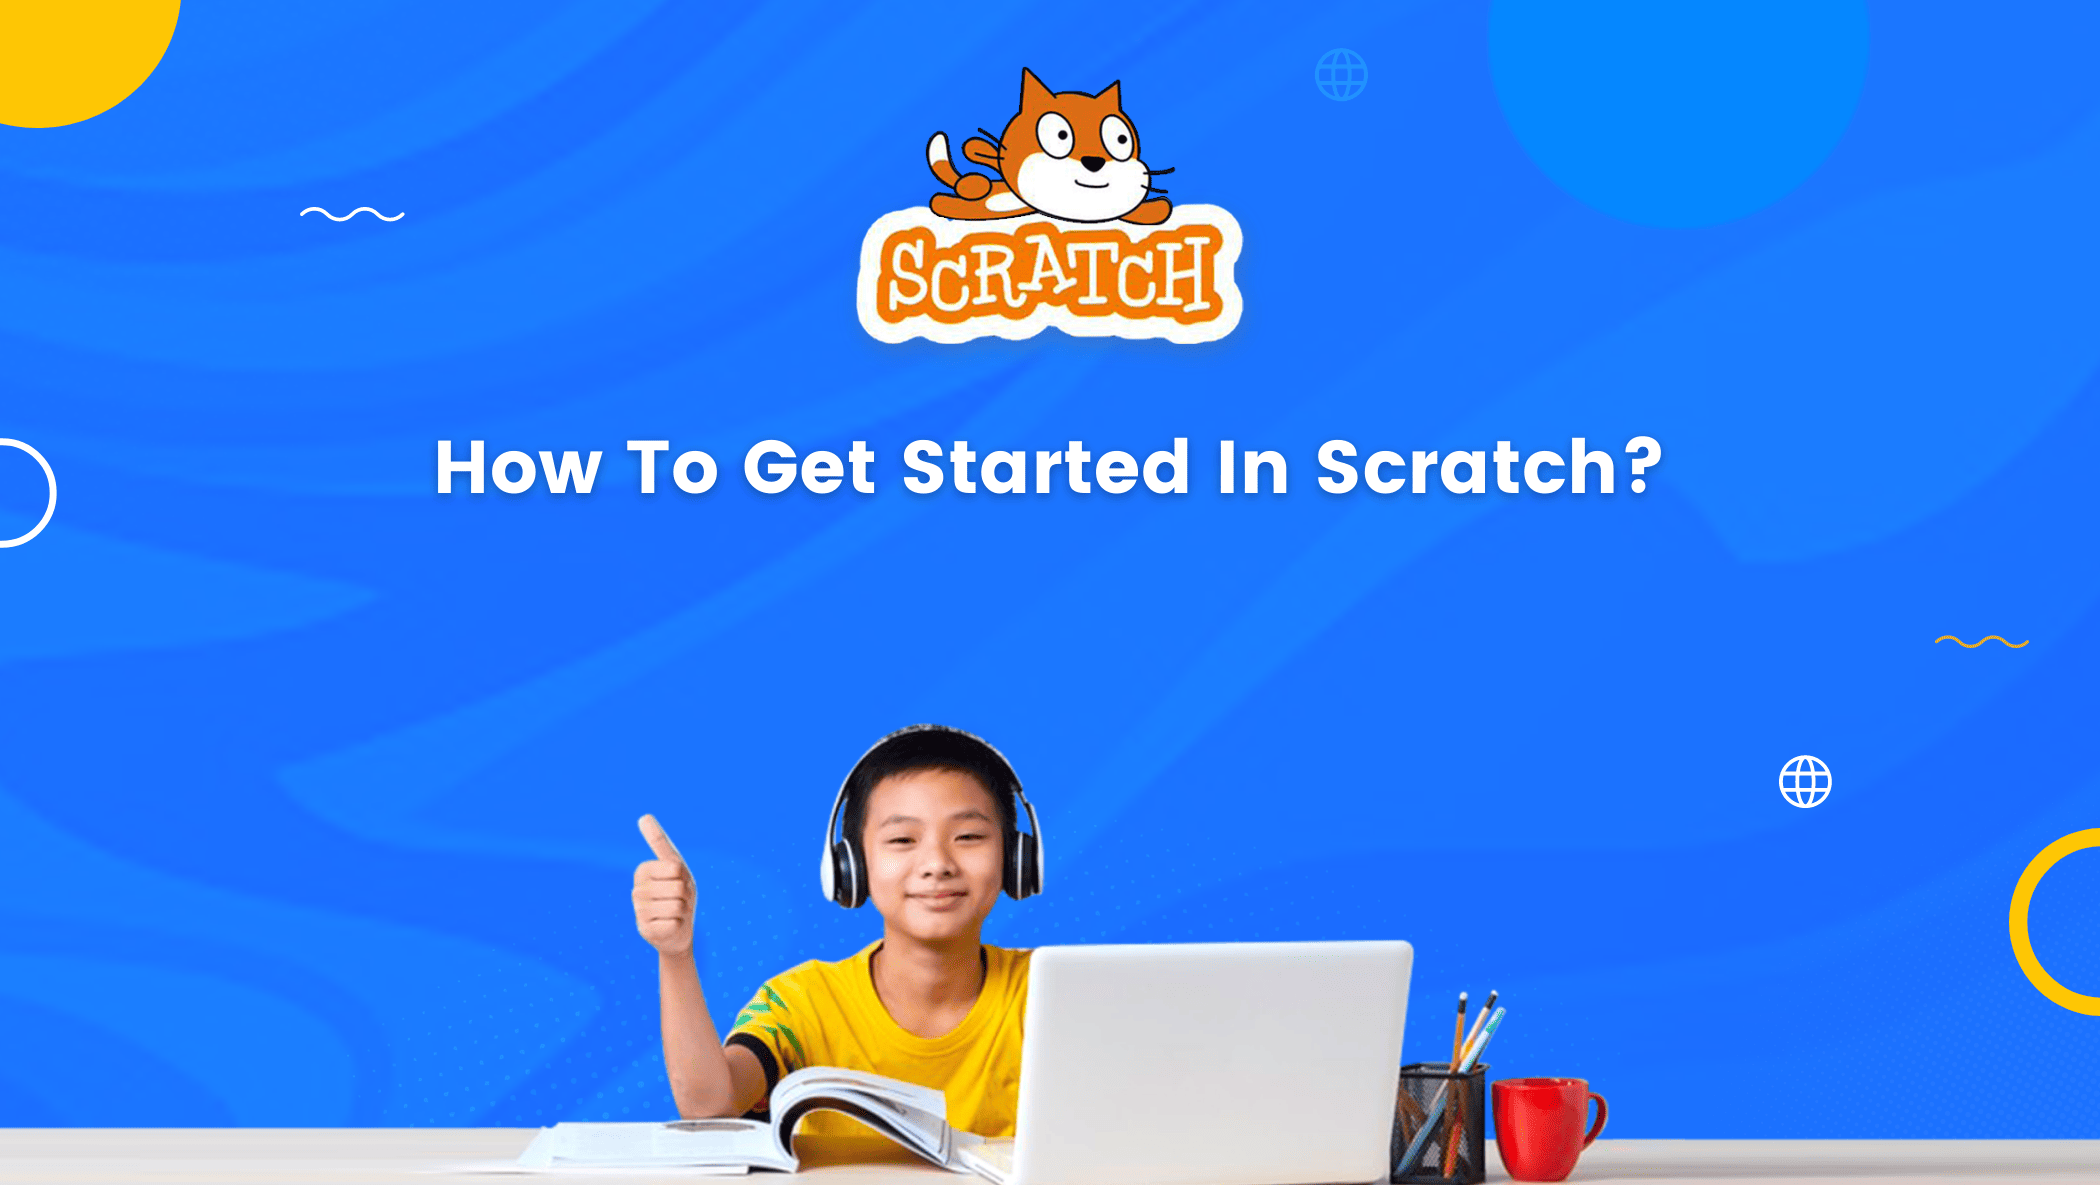 https://brightchamps.com/blog/wp-content/uploads/2022/03/How-To-Get-Started-In-Scratch.png